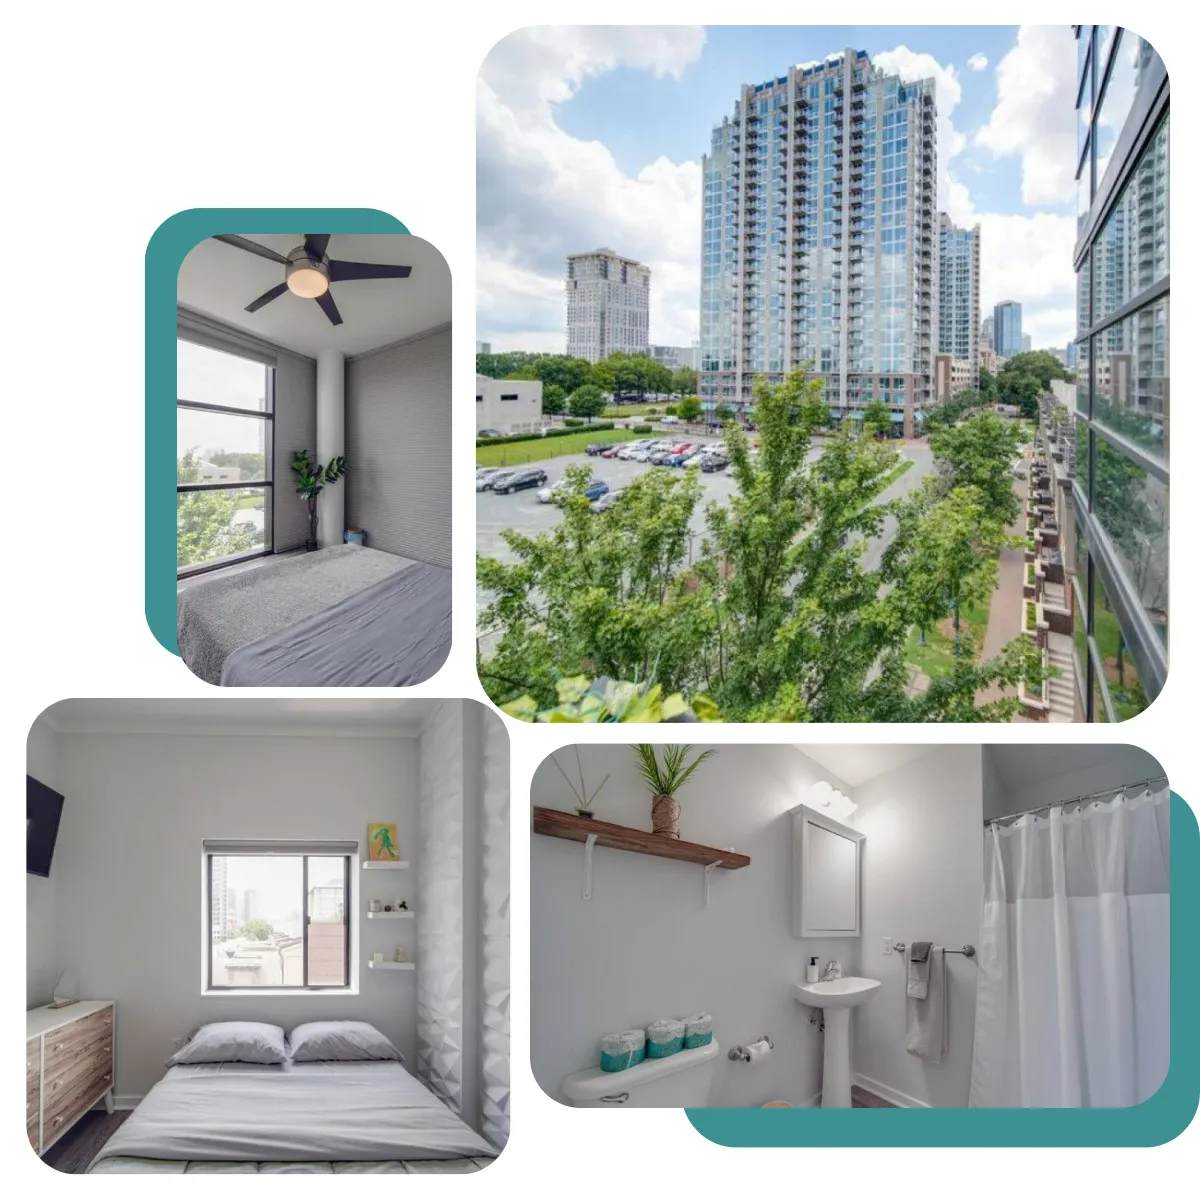 Stay in our Urban Condo, your ideal spot in Charlotte, with free parking, laundry facilities, towels, coffee maker, shampoo, conditioner, hair dryer, and iron provided for your convenience.